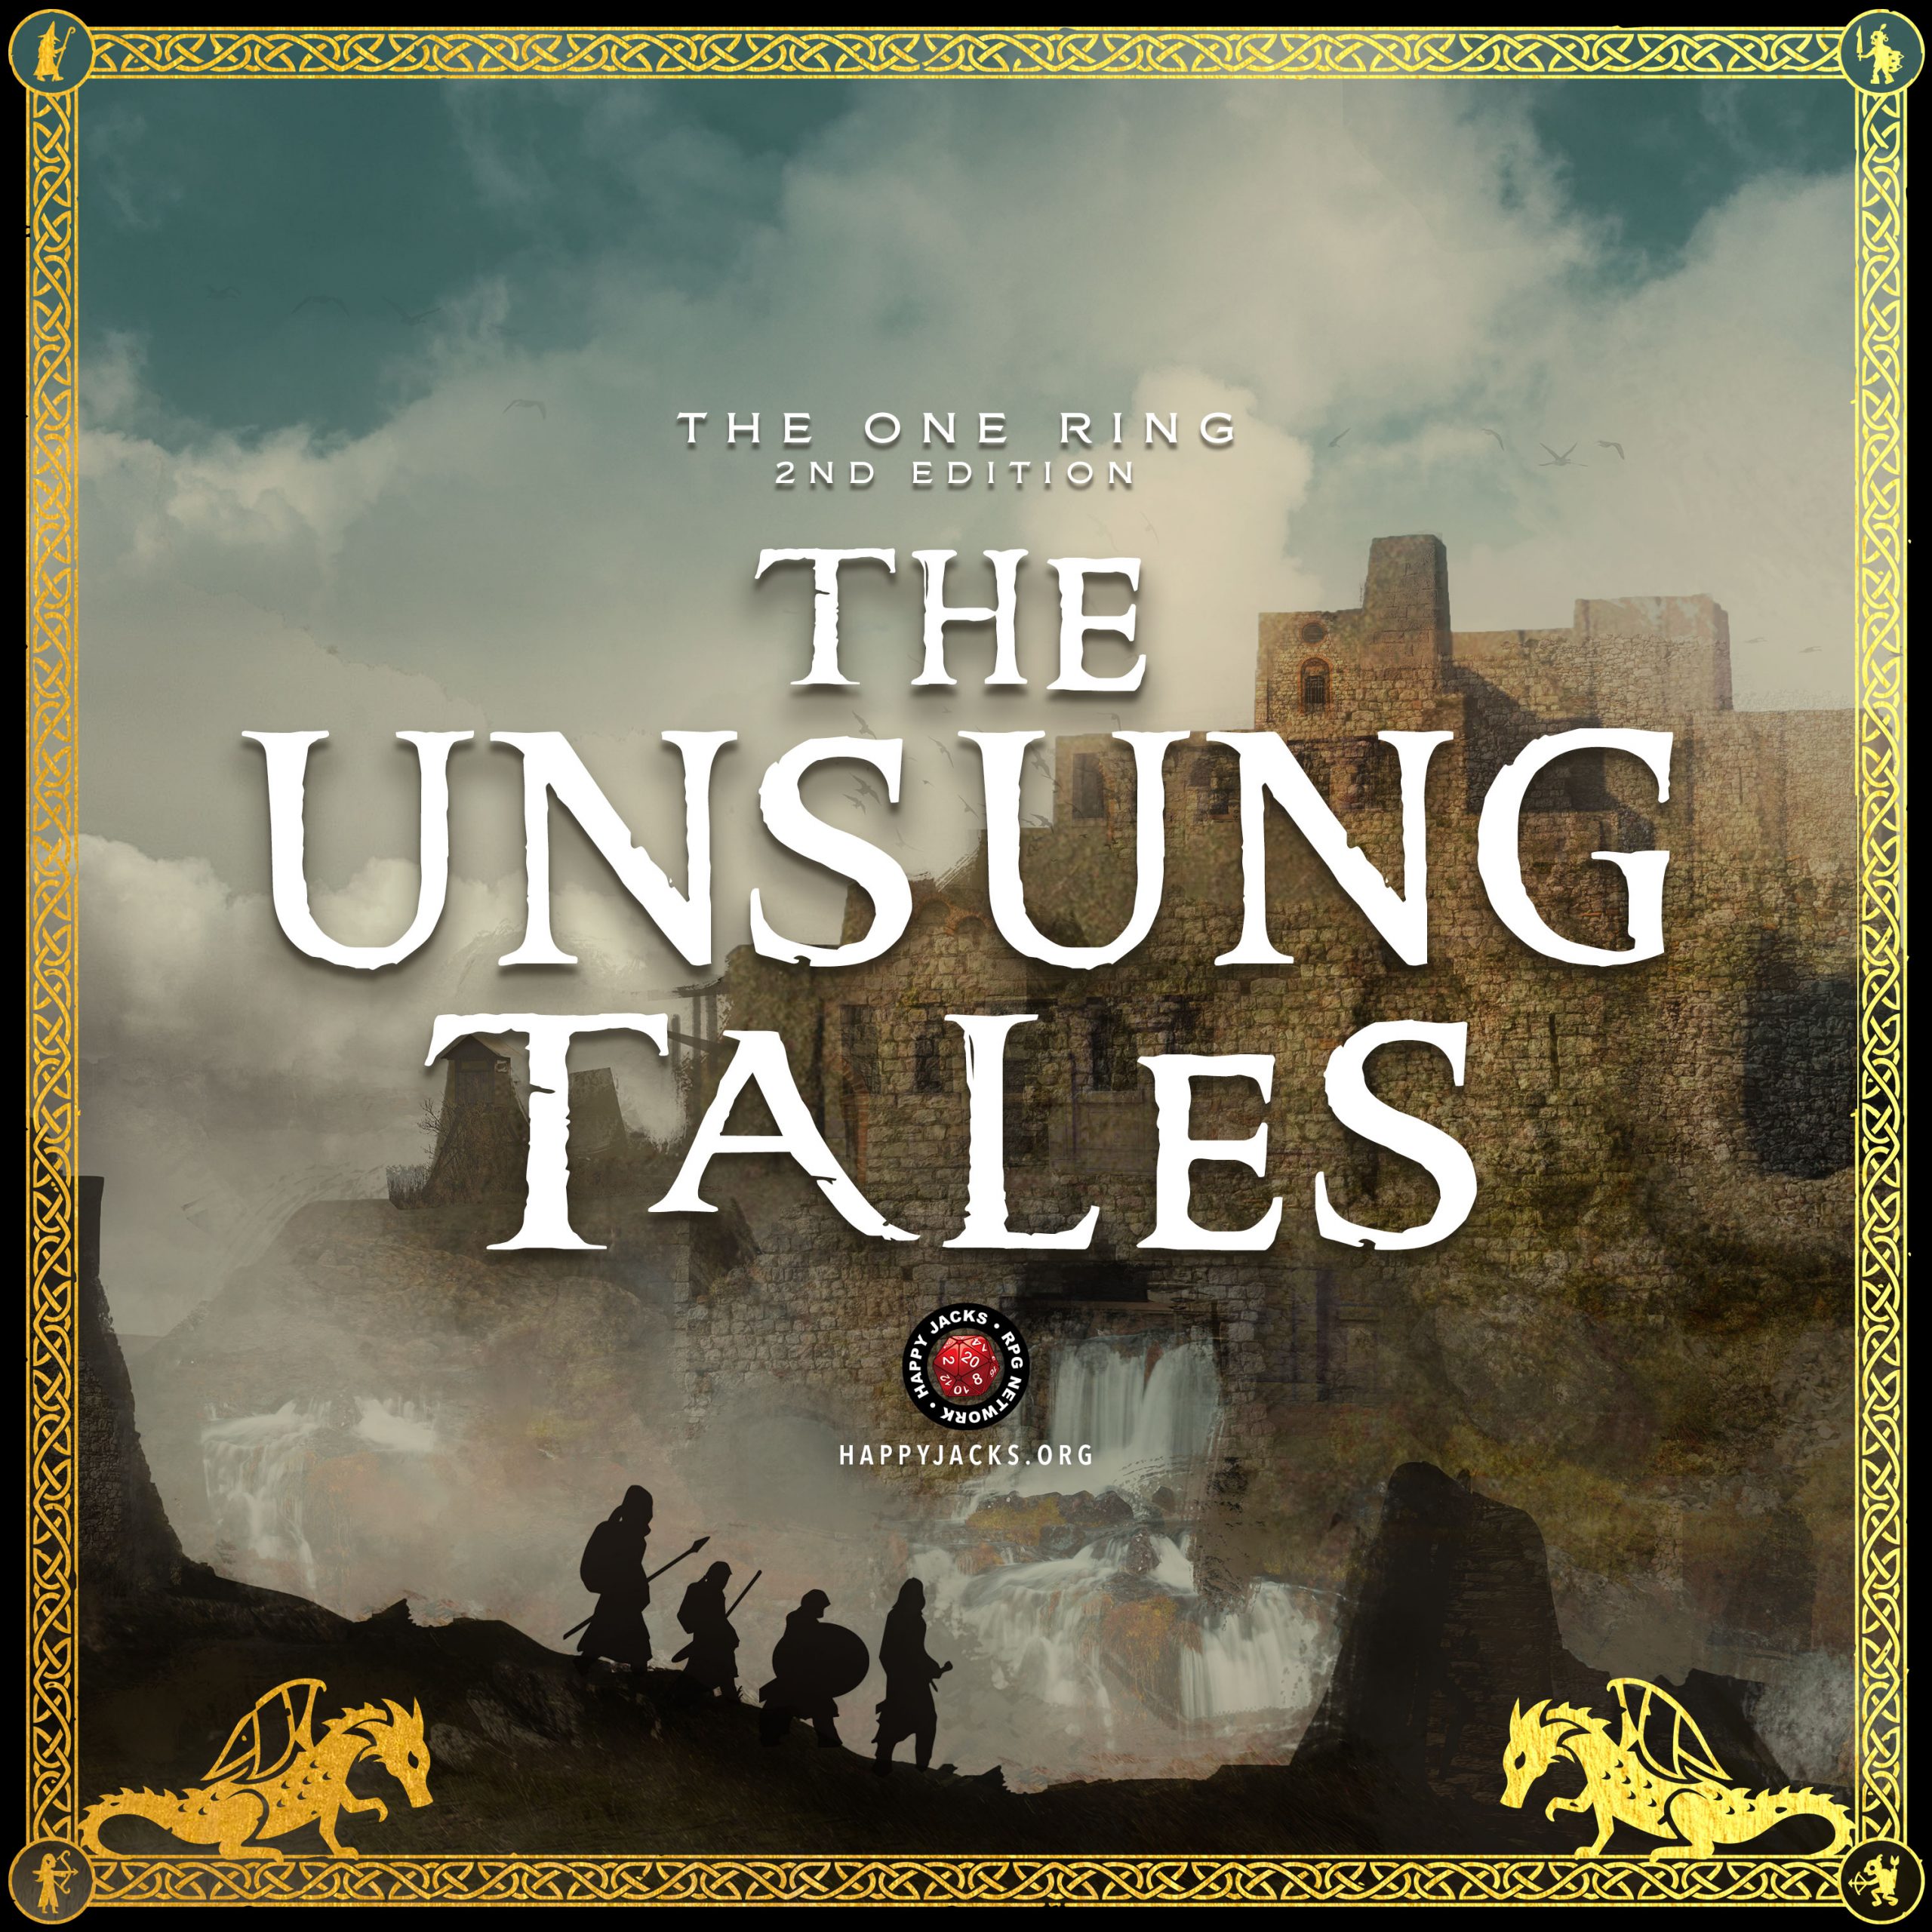 UNSUNG01 The Road to Bree | The Unsung Tales | The One Ring 2e